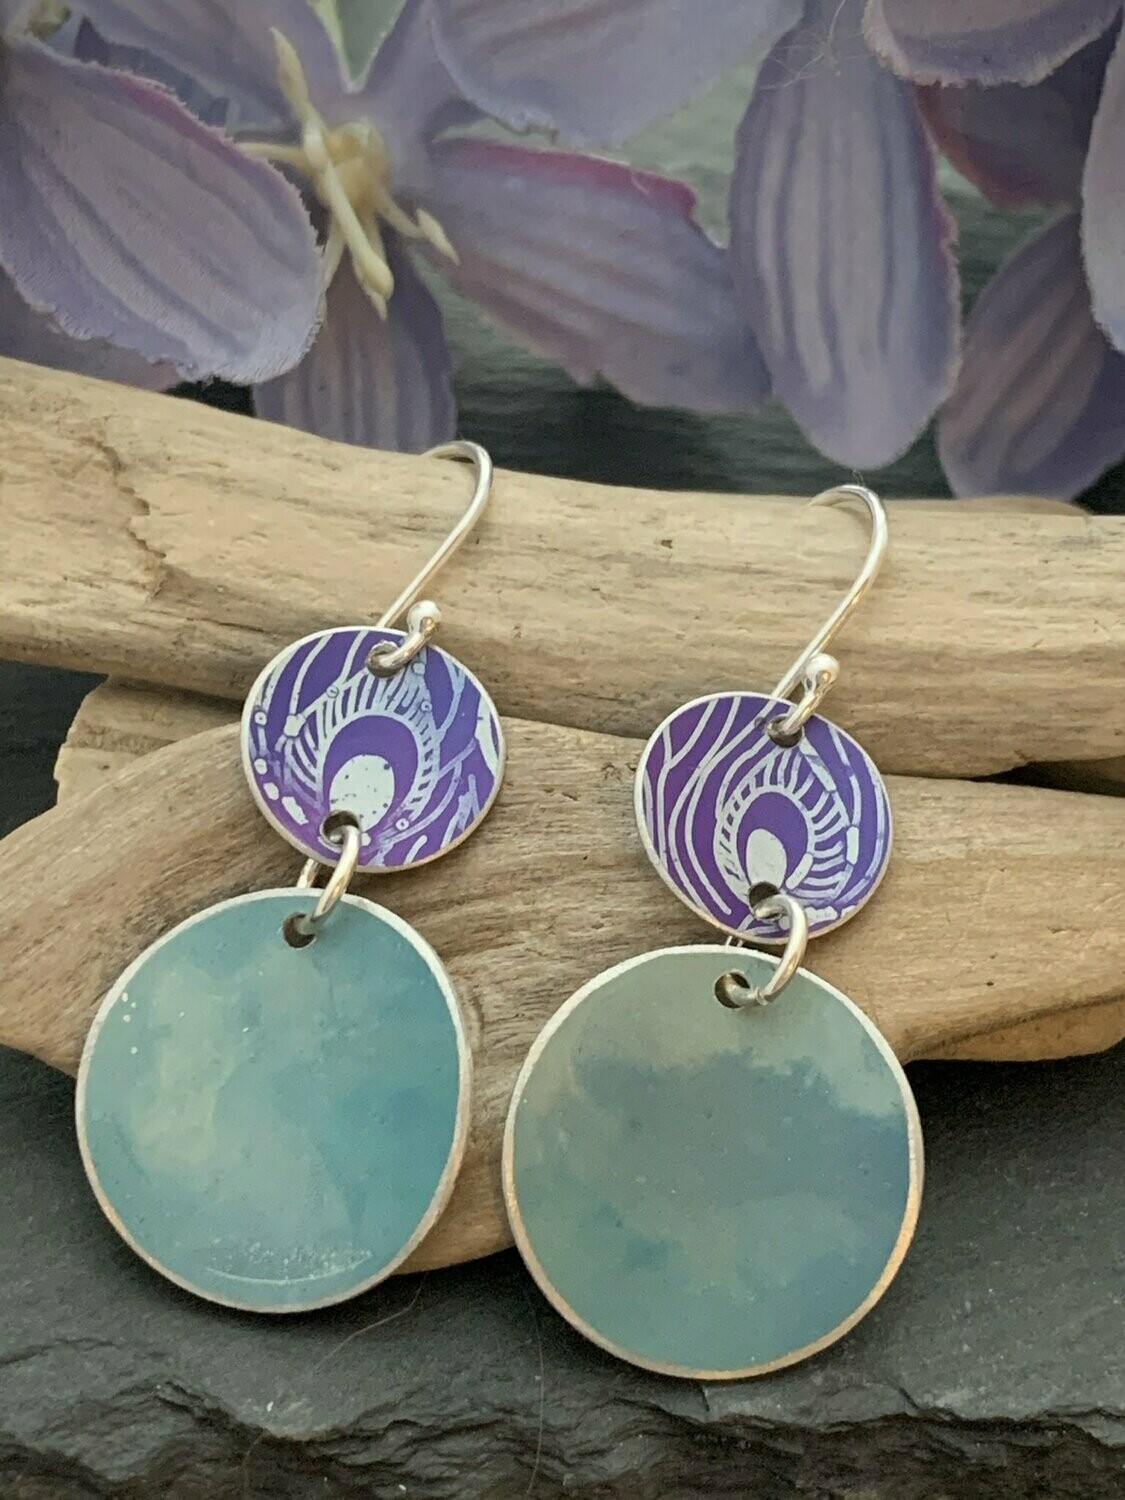 Printed Aluminium and sterling silver drop earrings - Turquoise and Purple peacock